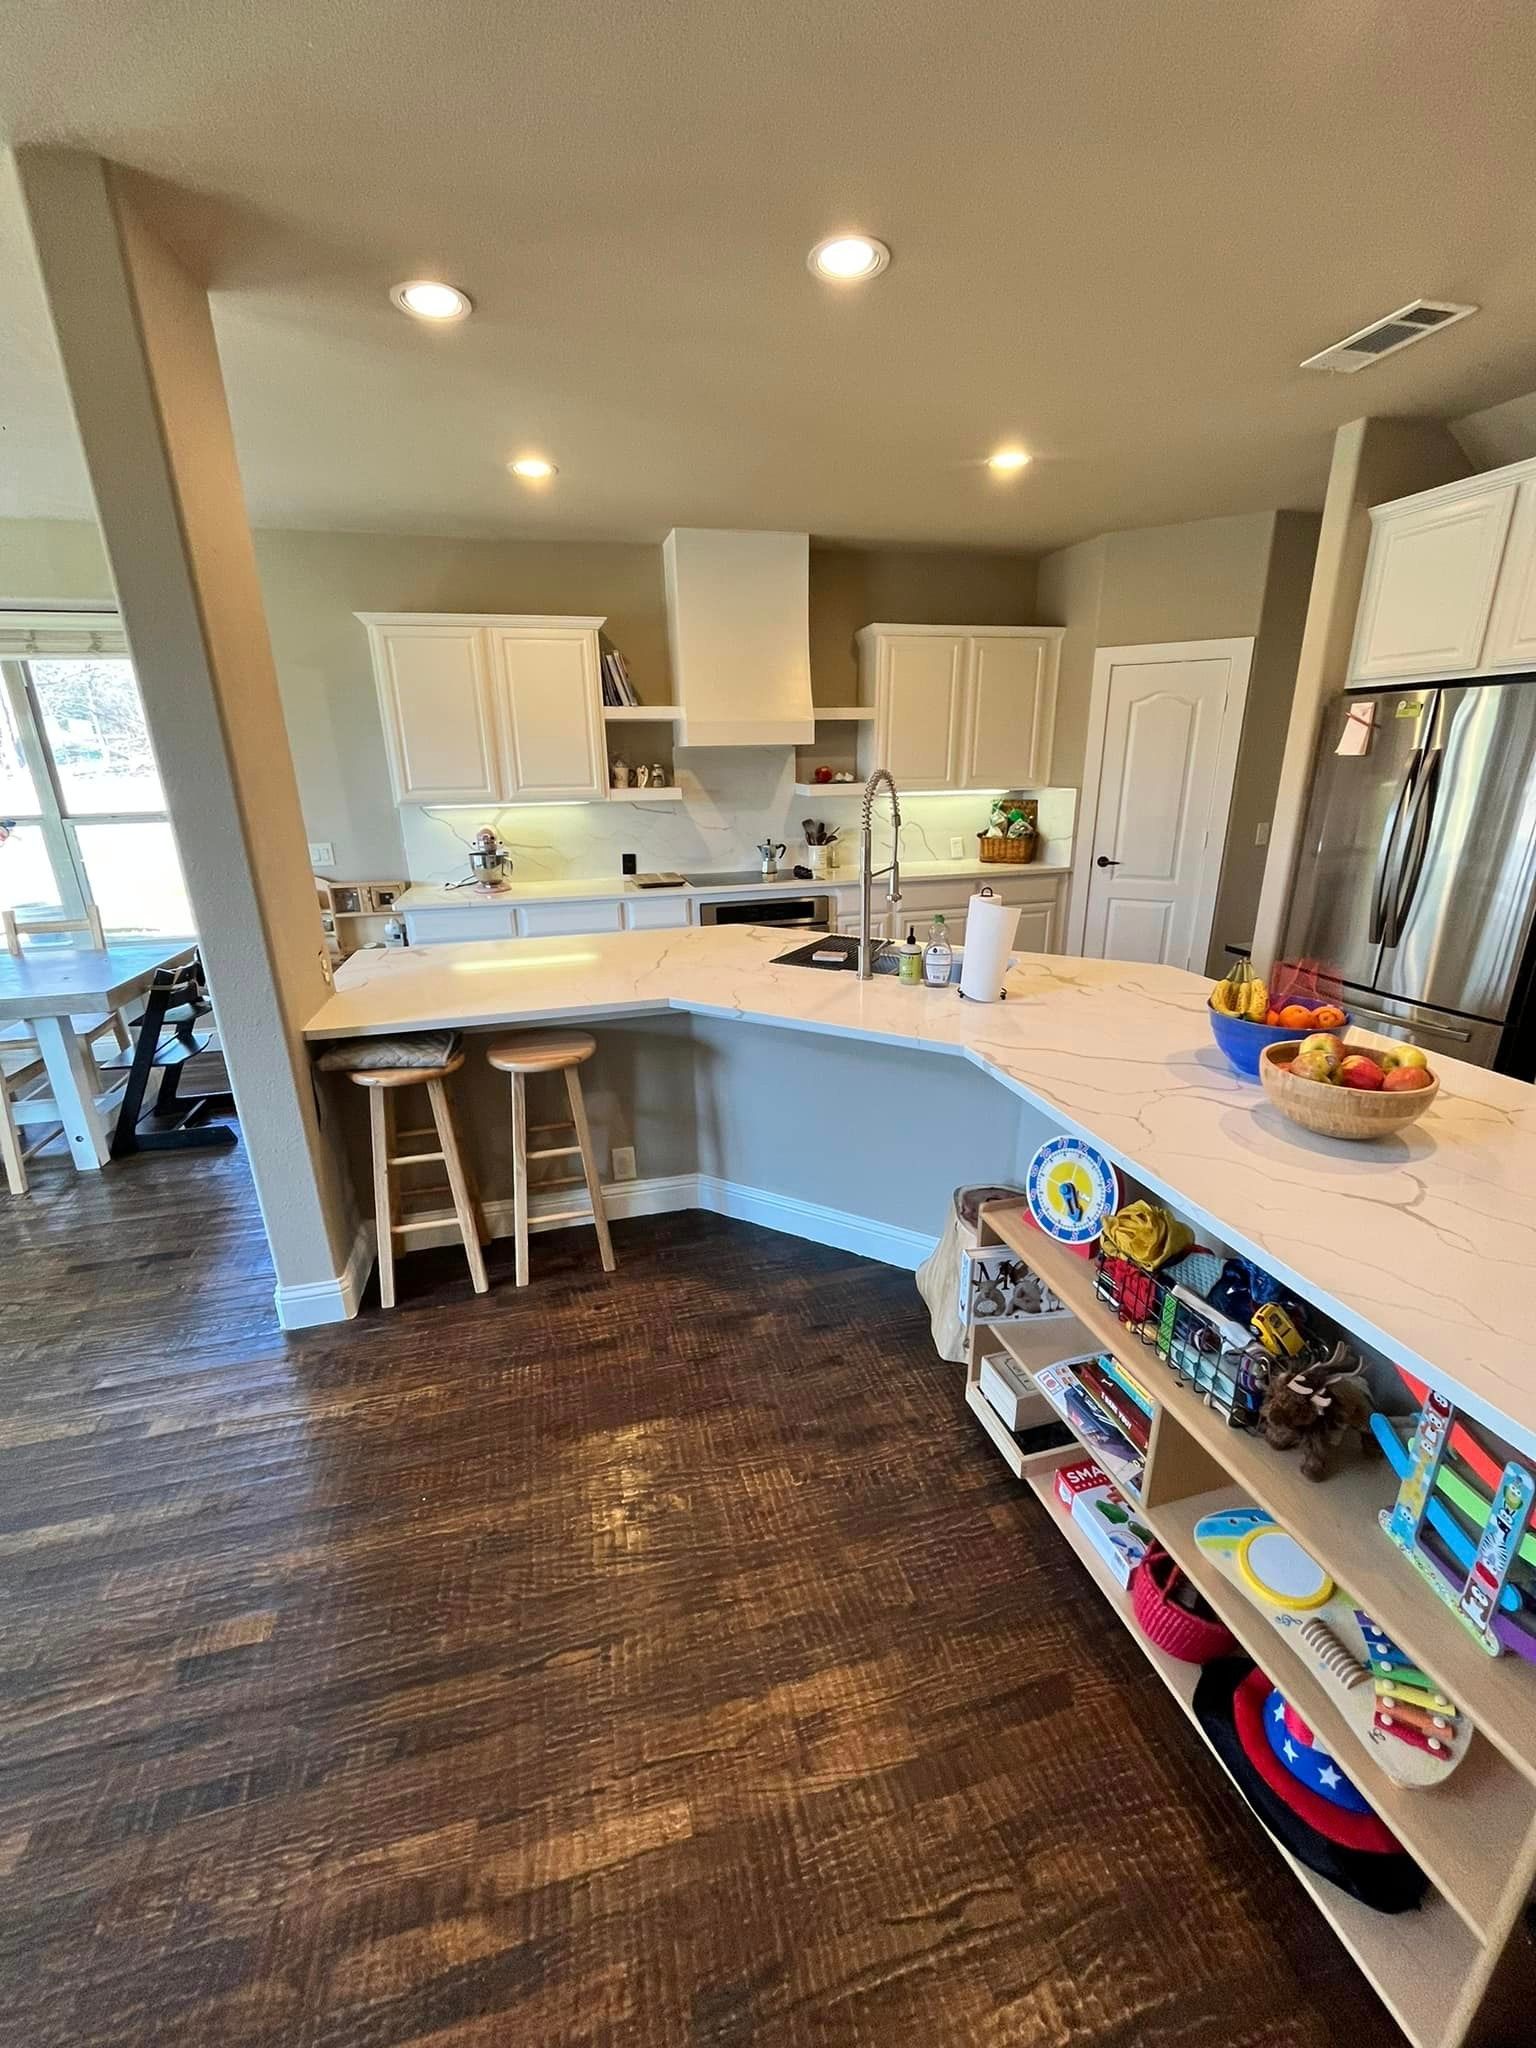 All Photos for Chrisman Cleaning, LLC in Princeton, TX